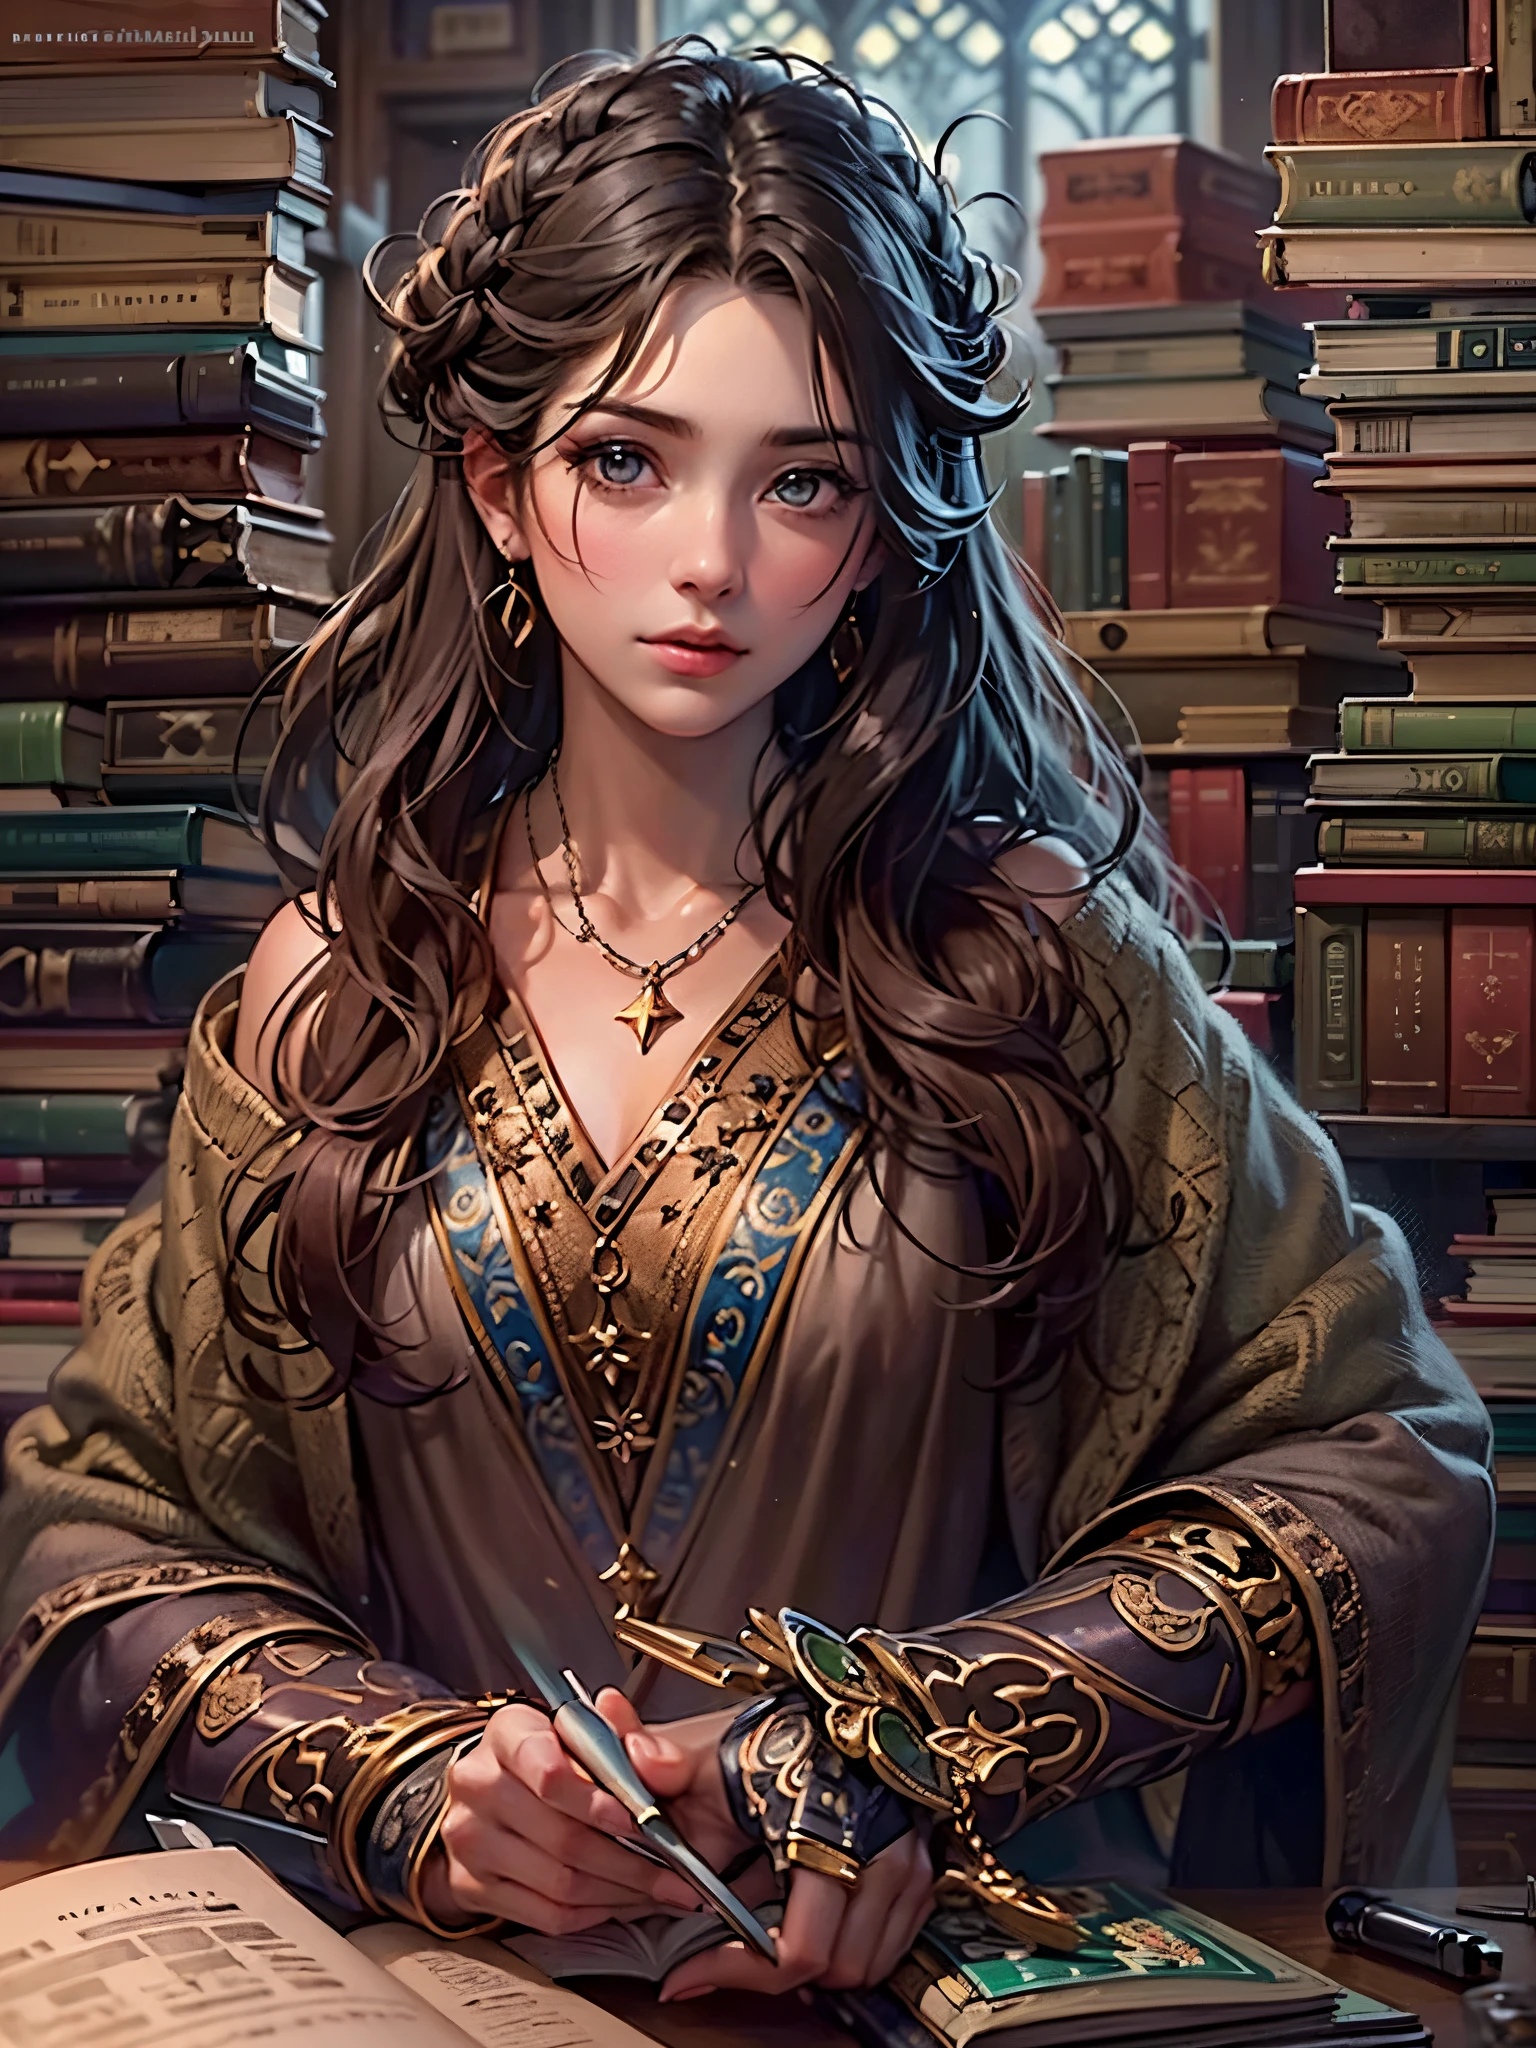 ((highest quality)),(ultra high resolution),(Super detailed),(detailed description),((best CG)),(best work of art),super precision art,great drawing art,(Fantasy art with precise details:1.5), (1 woman:1.6),alchemist:1.6,beautiful and well-shaped face:1.6,Intricately detailed robe:1.7,displeased look:1.6,shiny skin:1.6,messy hair:1.6, Books piled up messy:1.5,A shelf containing experimental tools:1.6